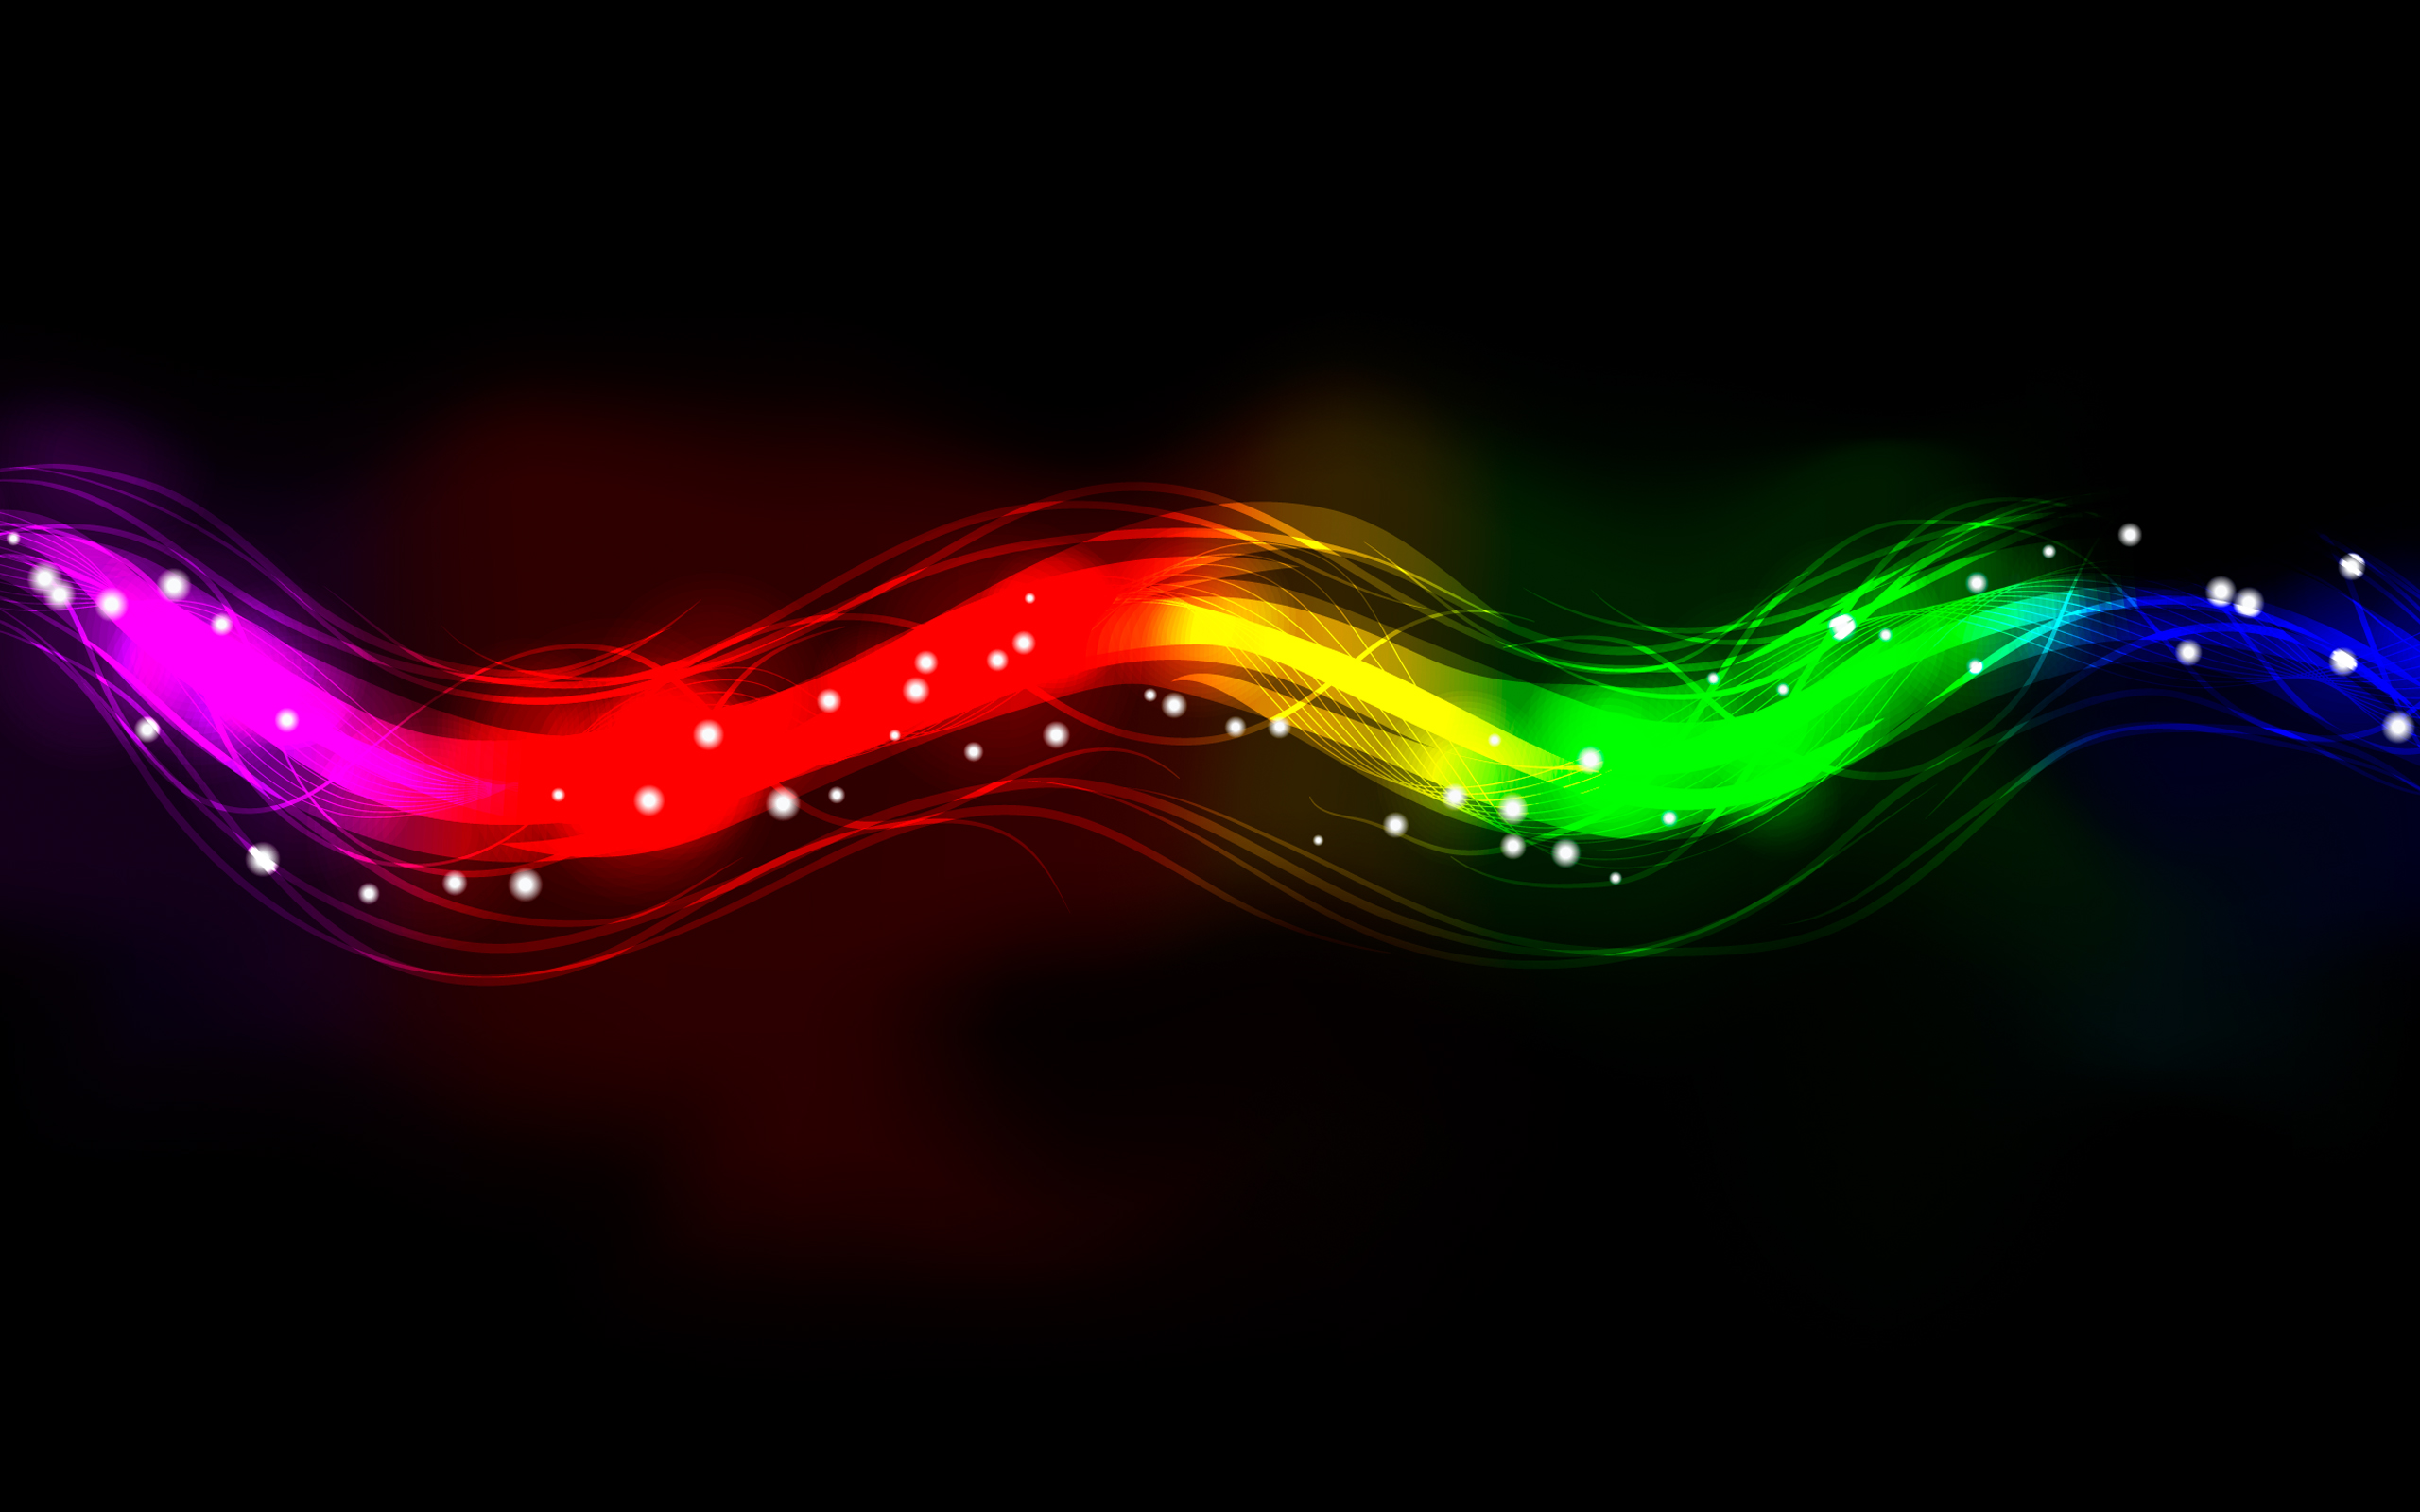 Abstract, Colorful, Black Background, Digital Art Wallpapers Hd